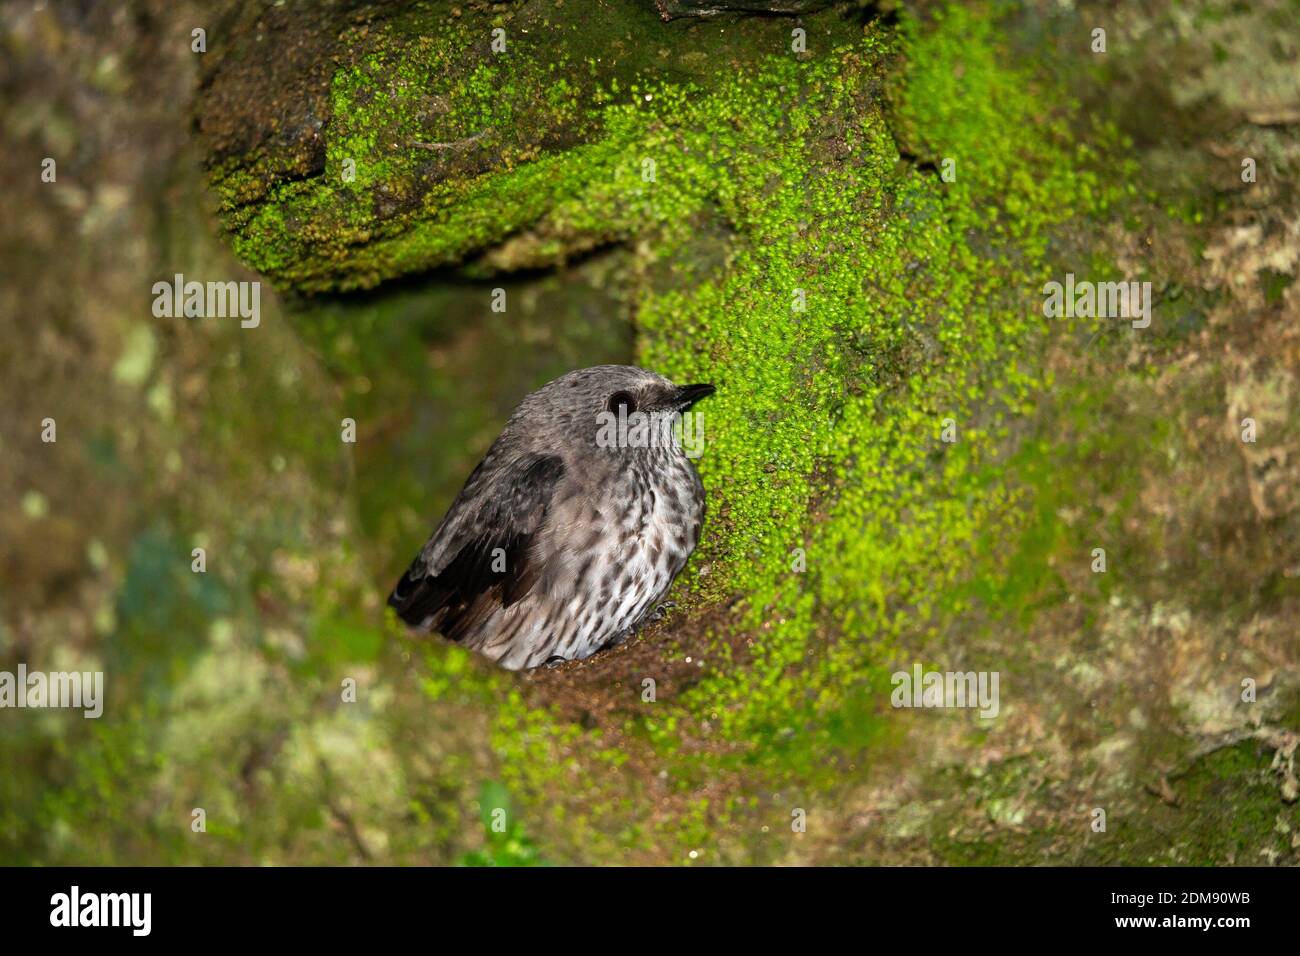 A small gray native bird in its nest. Stock Photo